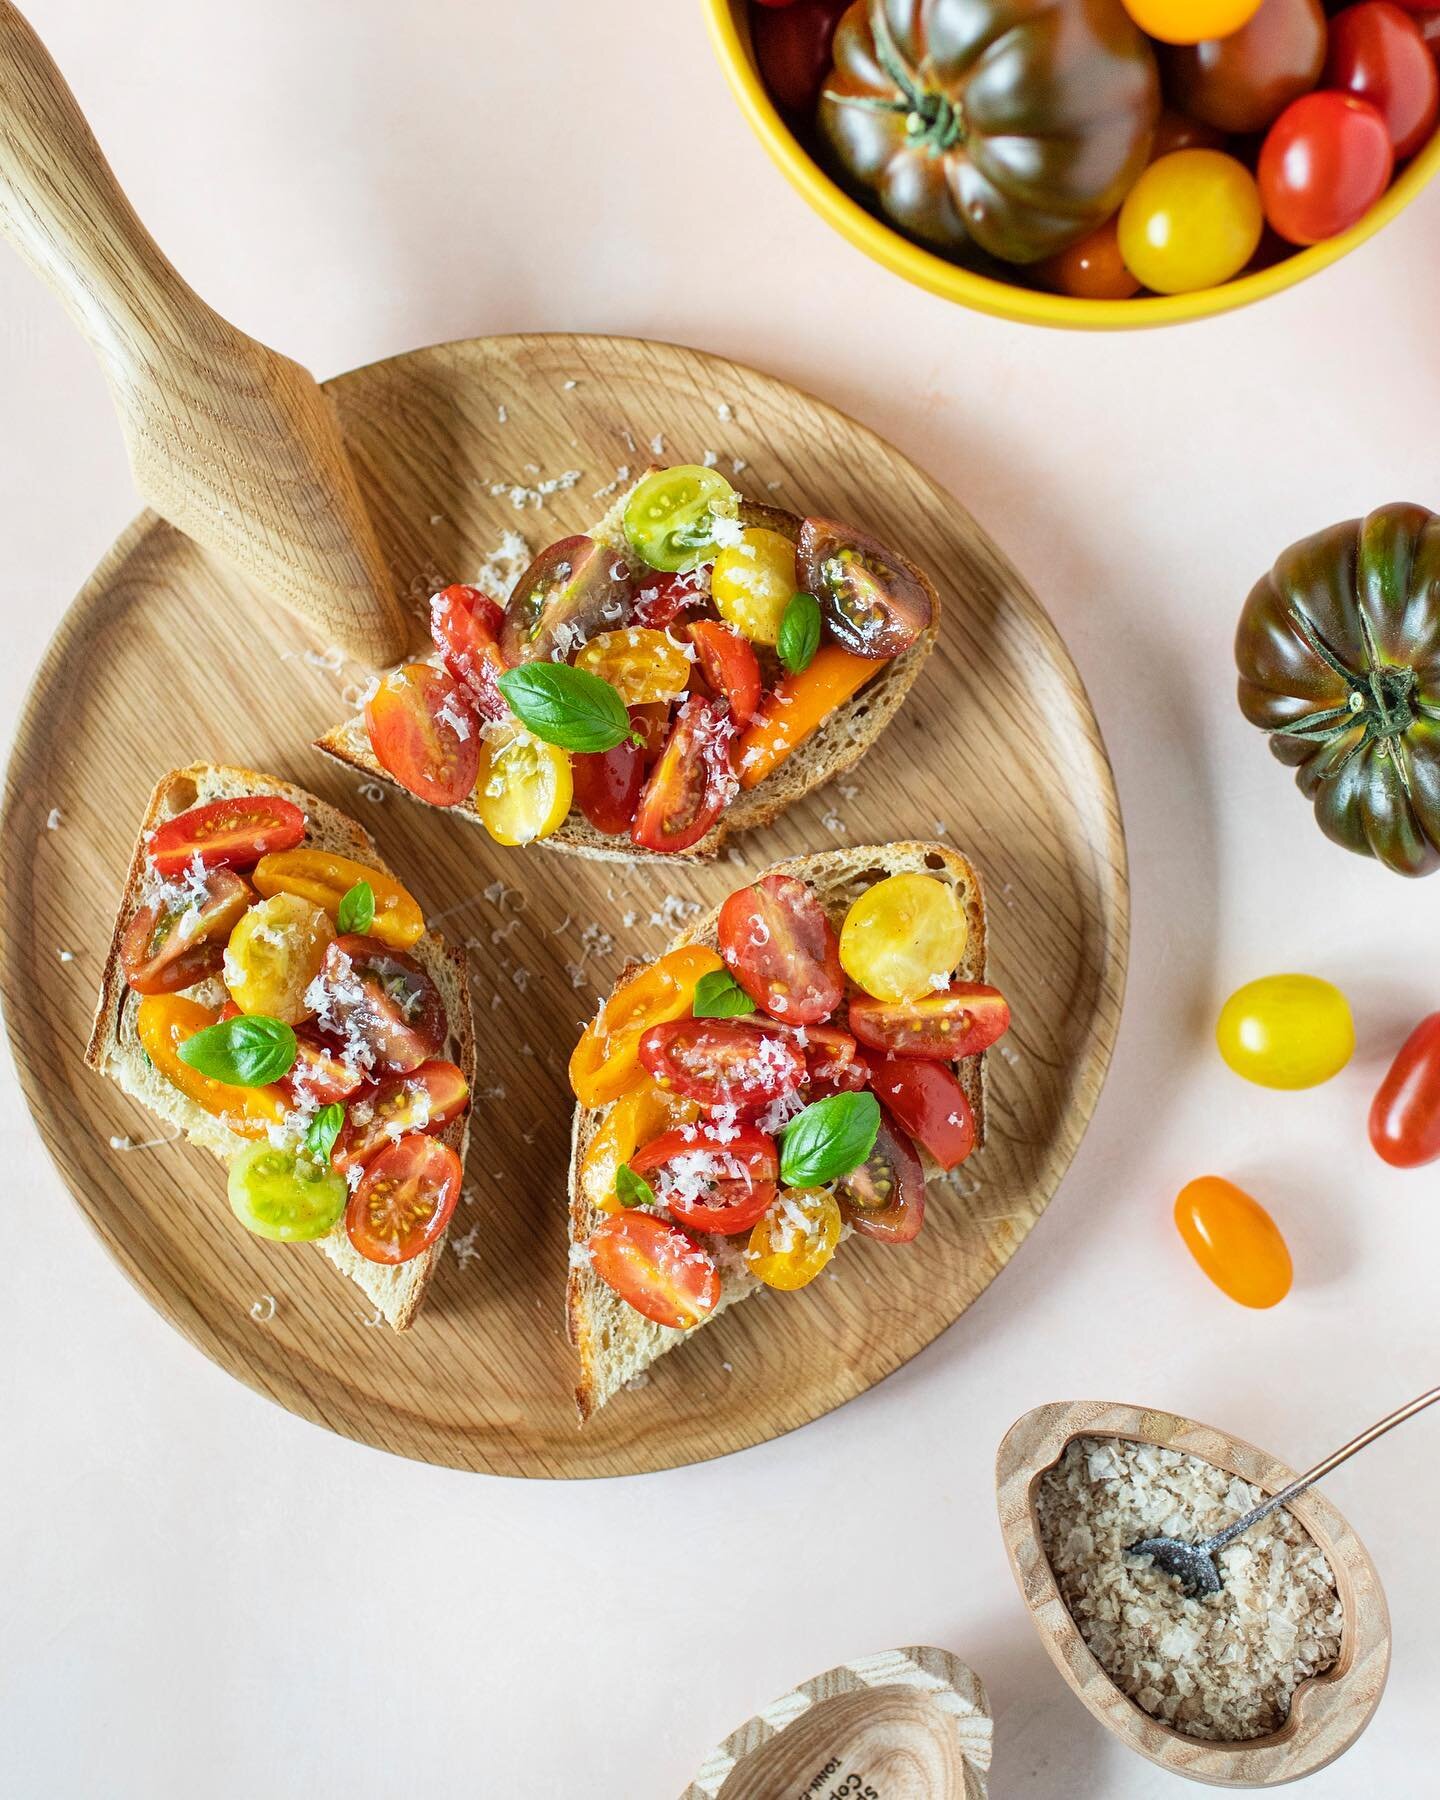 ⁣because it isn&rsquo;t summer without homemade tomato bruschetta! my version features greenhouse heirloom cherry tomatoes &amp; crusty sourdough bread as the base. find the full recipe below! 🍅🍅🍅 @producemadesimple #producemadesimple #greenhouseg